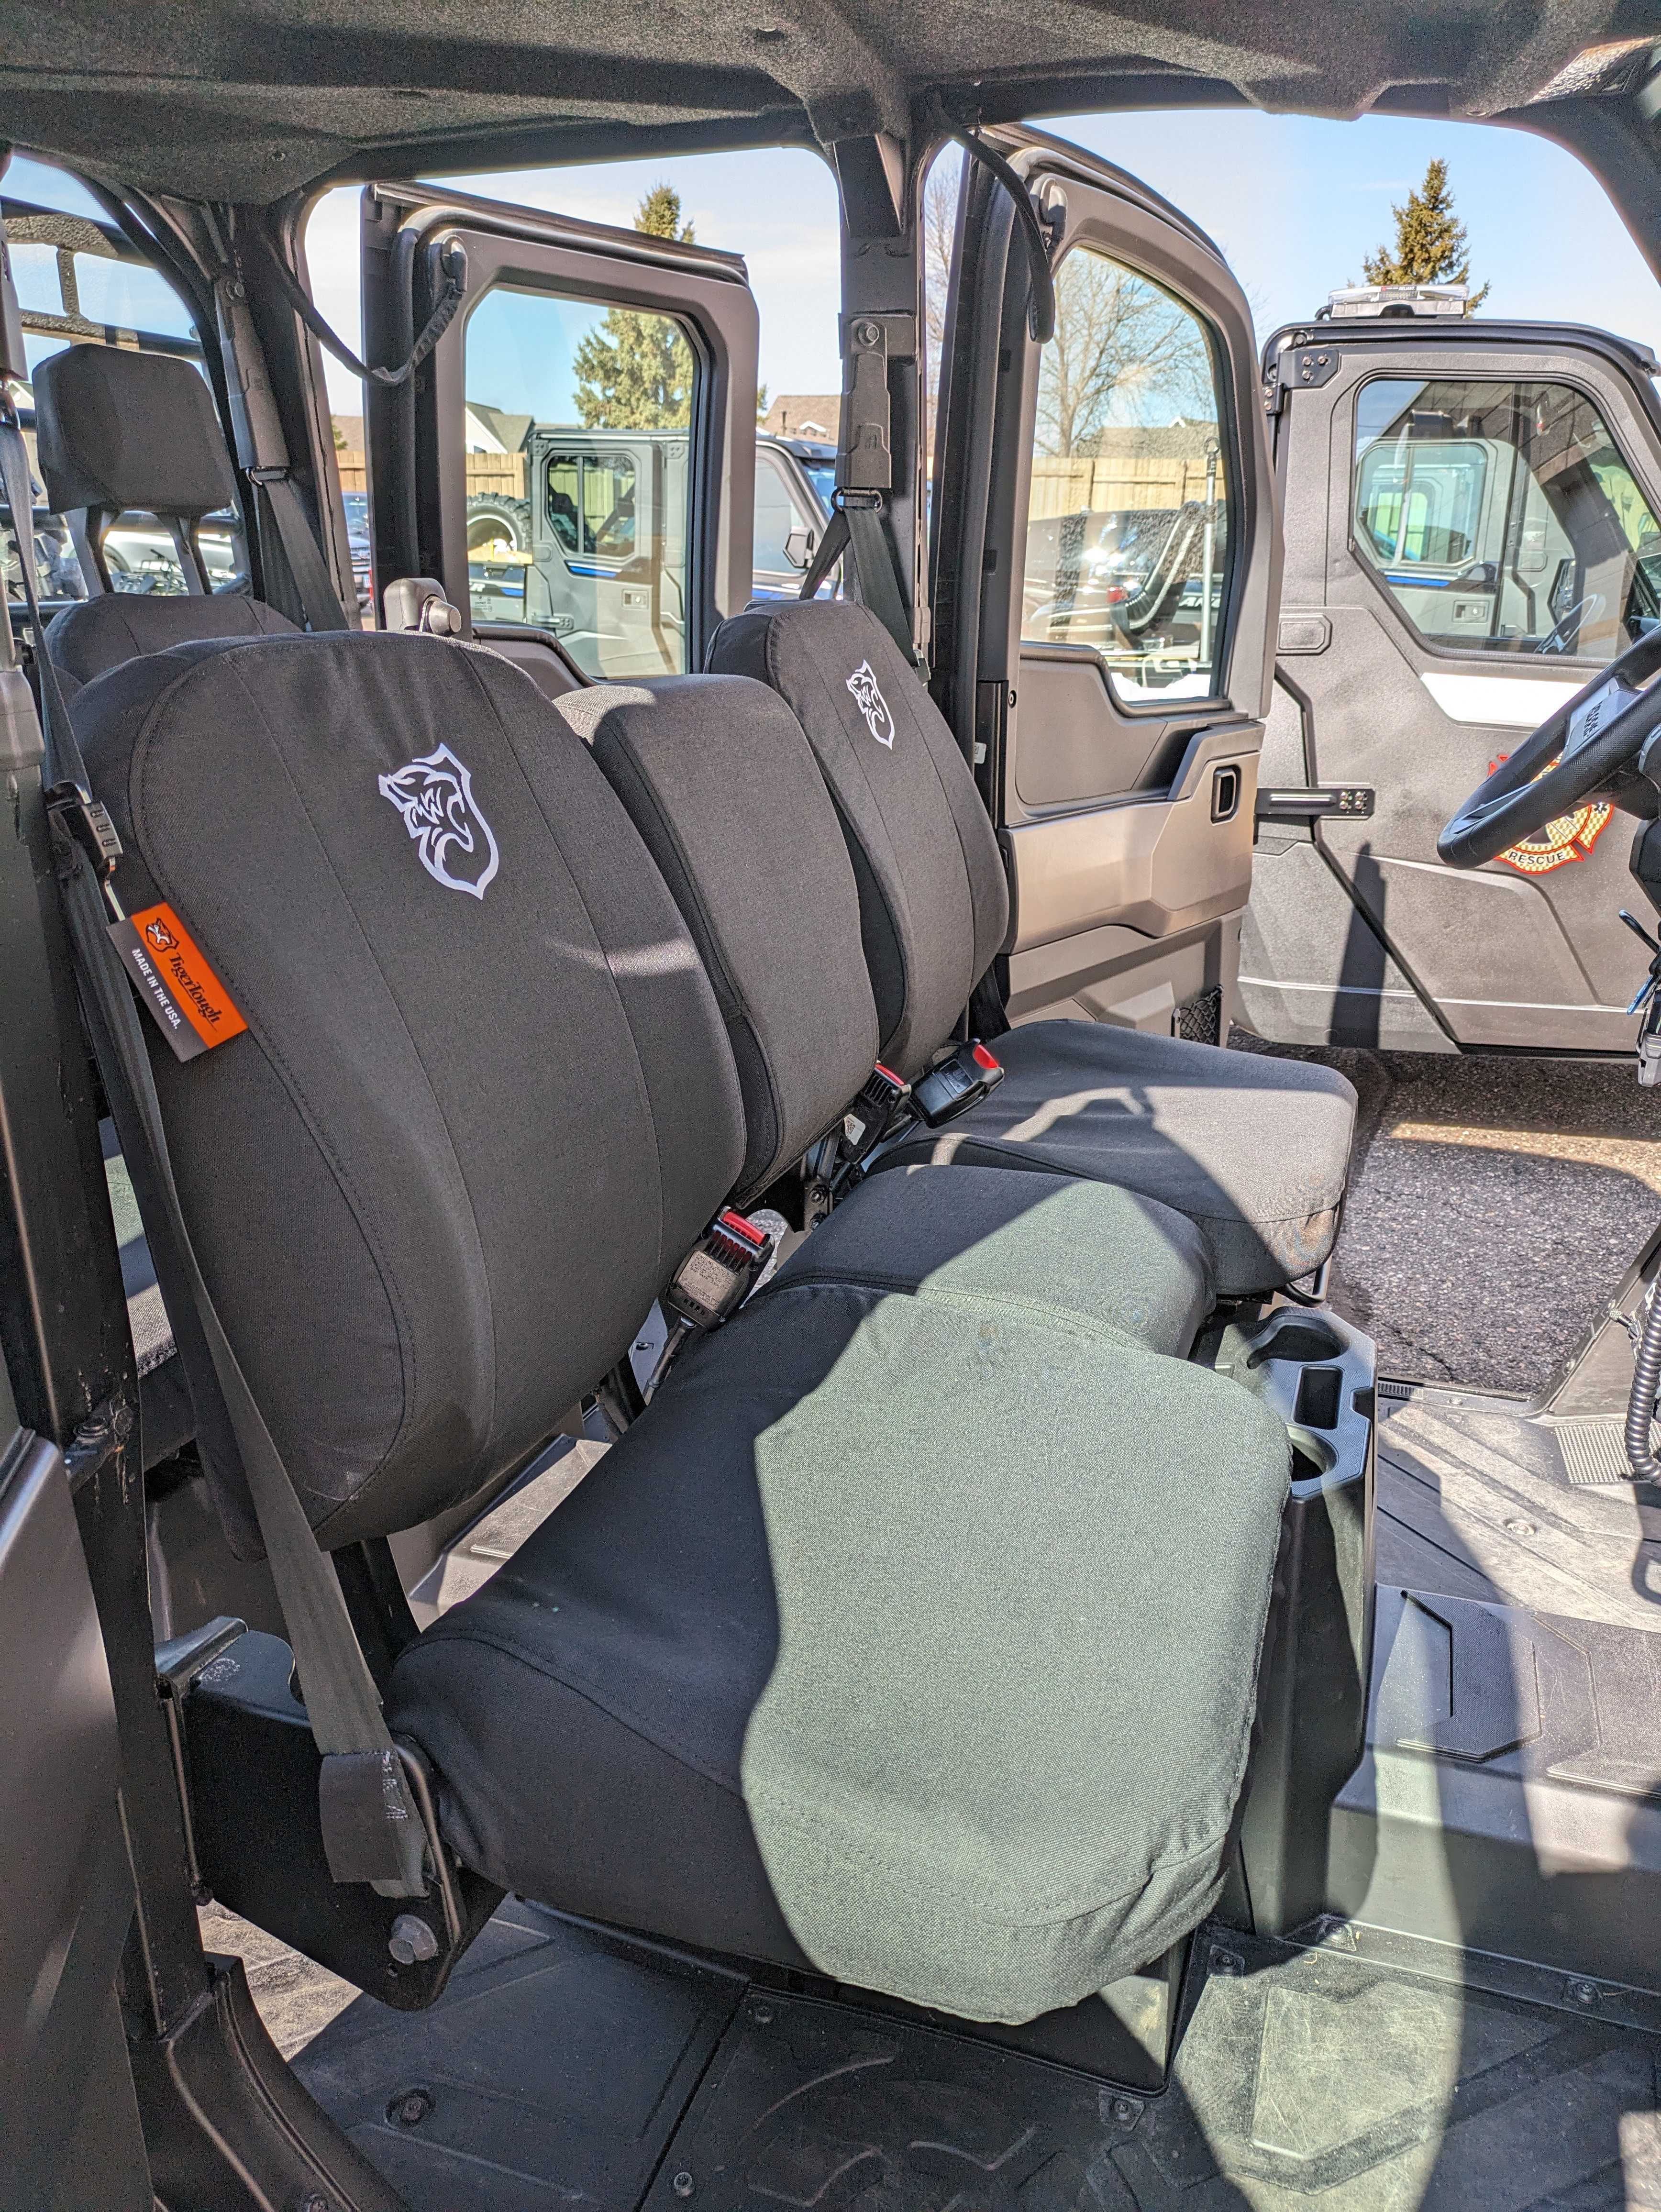 TigerTough Seat Covers in a Polaris Ranger side-by-side. TigerTough has seat covers for common side-by-sides, ATVs, and UTVs to protect their seats from the elements and the wear and tear of hard use.